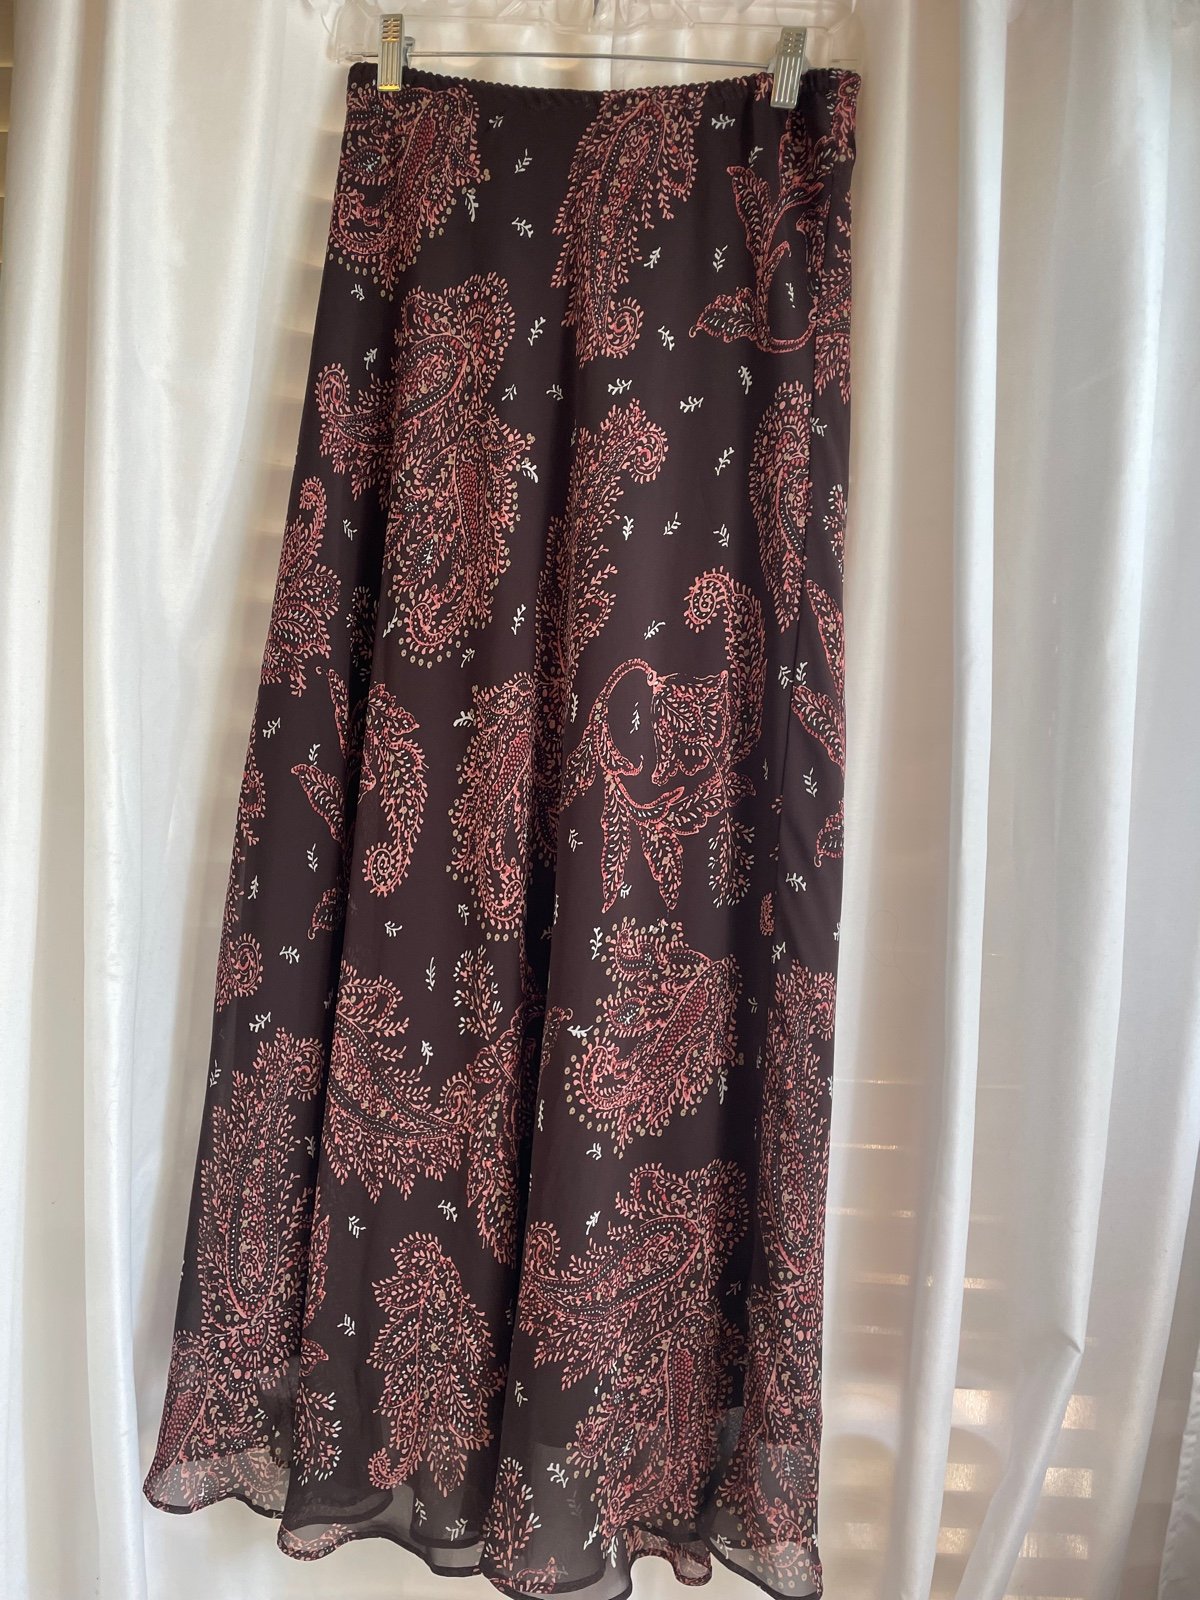 Affordable vintage maxi skirt mJS9w5UEO Cheap